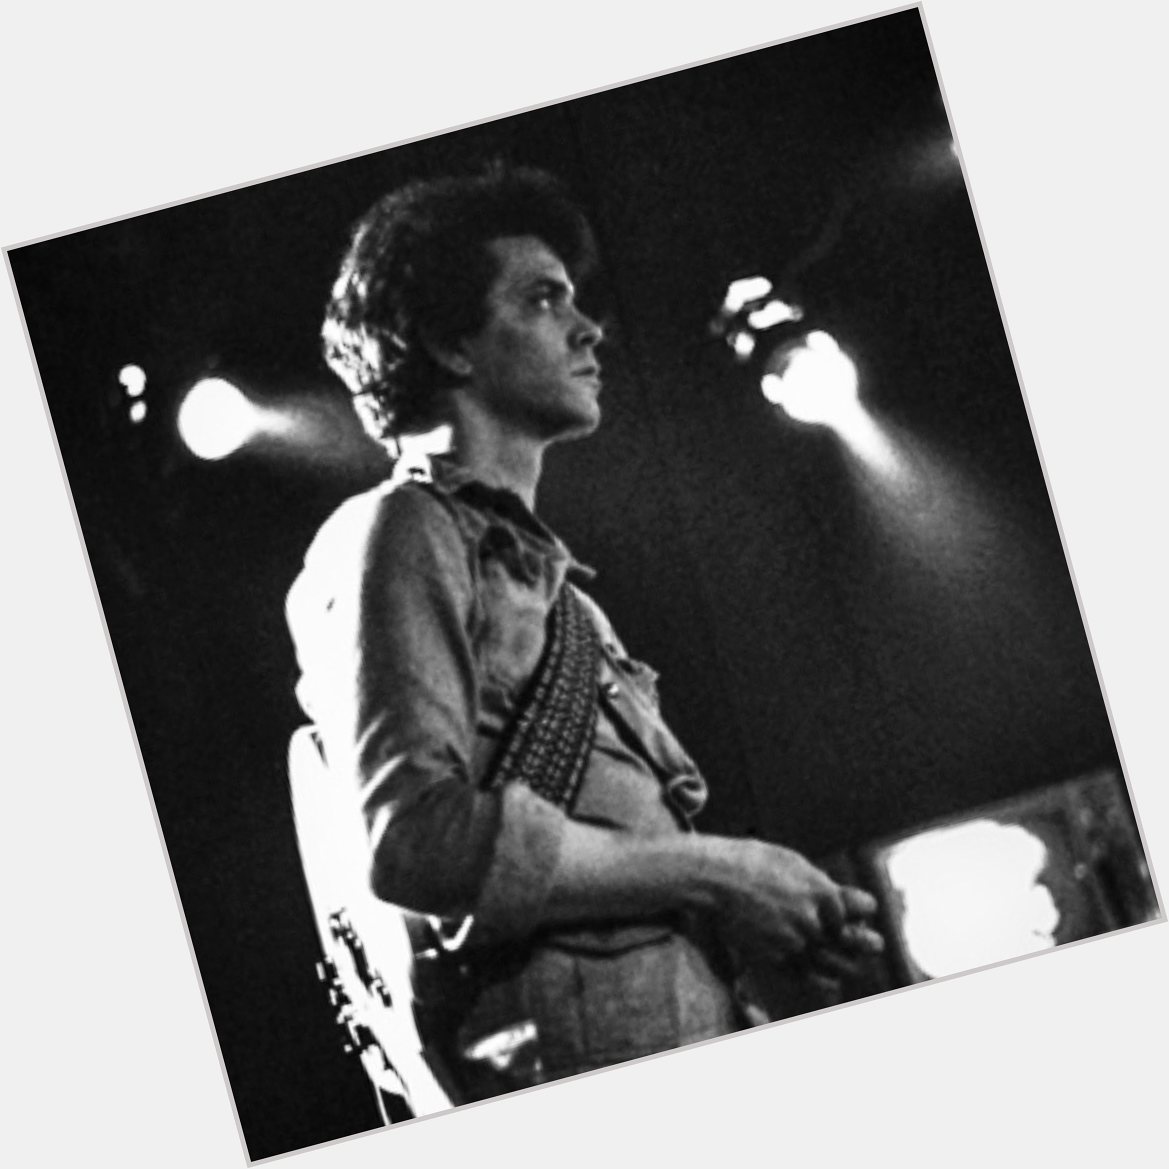 Happy heavenly birthday to Lou Reed. 1976 pic by me 